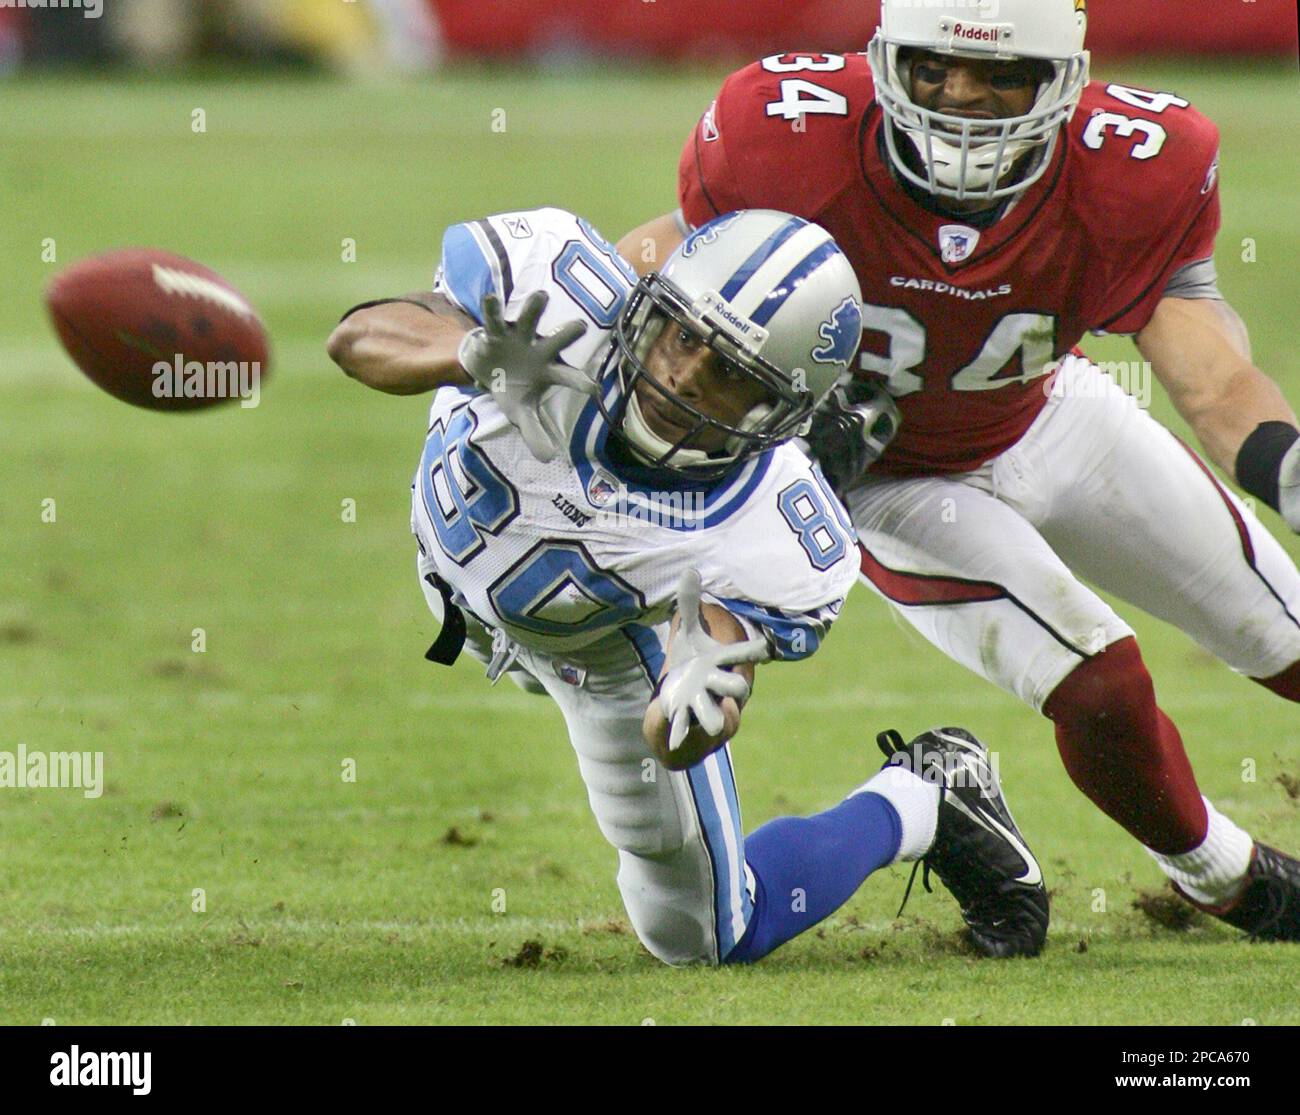 Arizona Cardinals Robert Griffith (34) watches as Detroit Lions' Devale  Ellis (80) tries to pull in a pass during the second quarter of their  football game Sunday, Nov. 19, 2006 in Glendale,